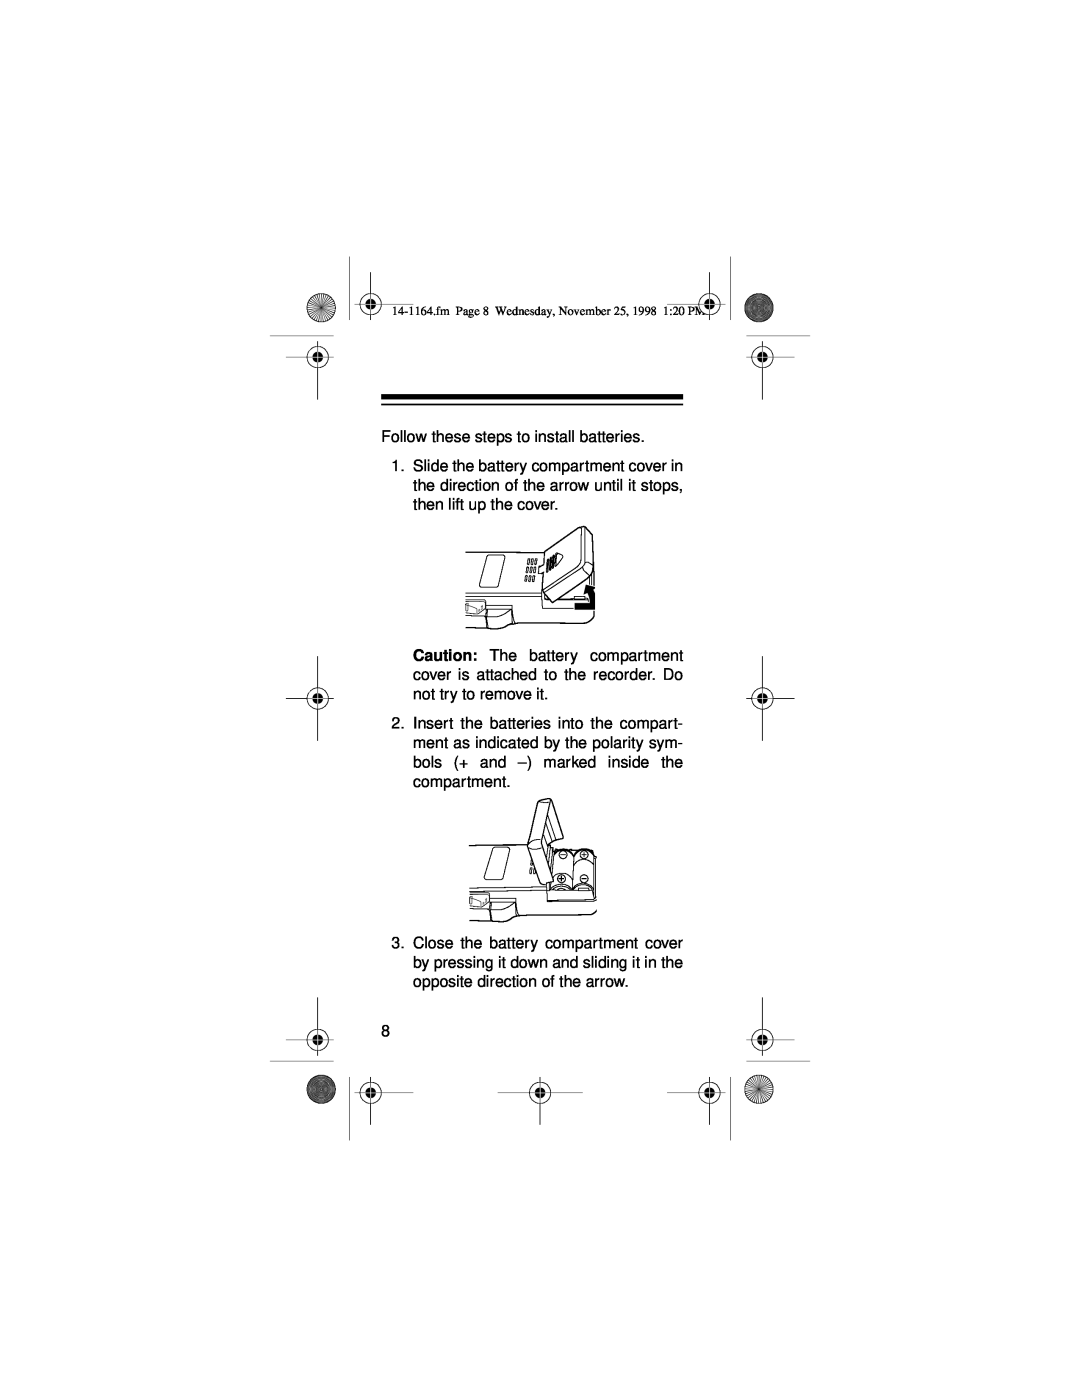 Optimus - Katadyn Products Inc Micro-37 owner manual Follow these steps to install batteries 